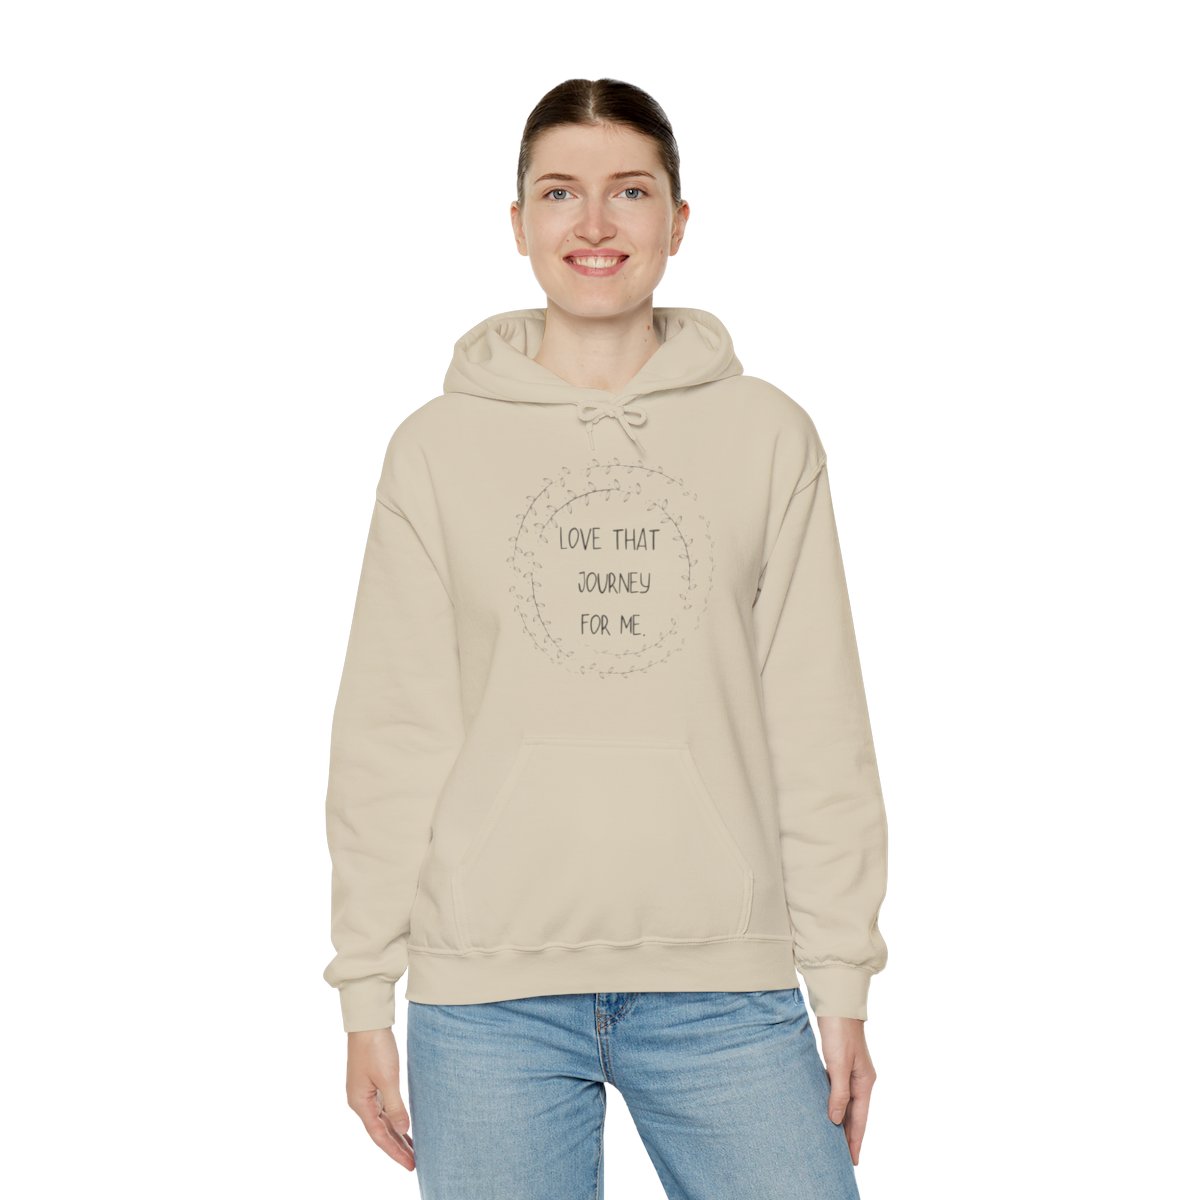 Love that journey for me hoodie product thumbnail image